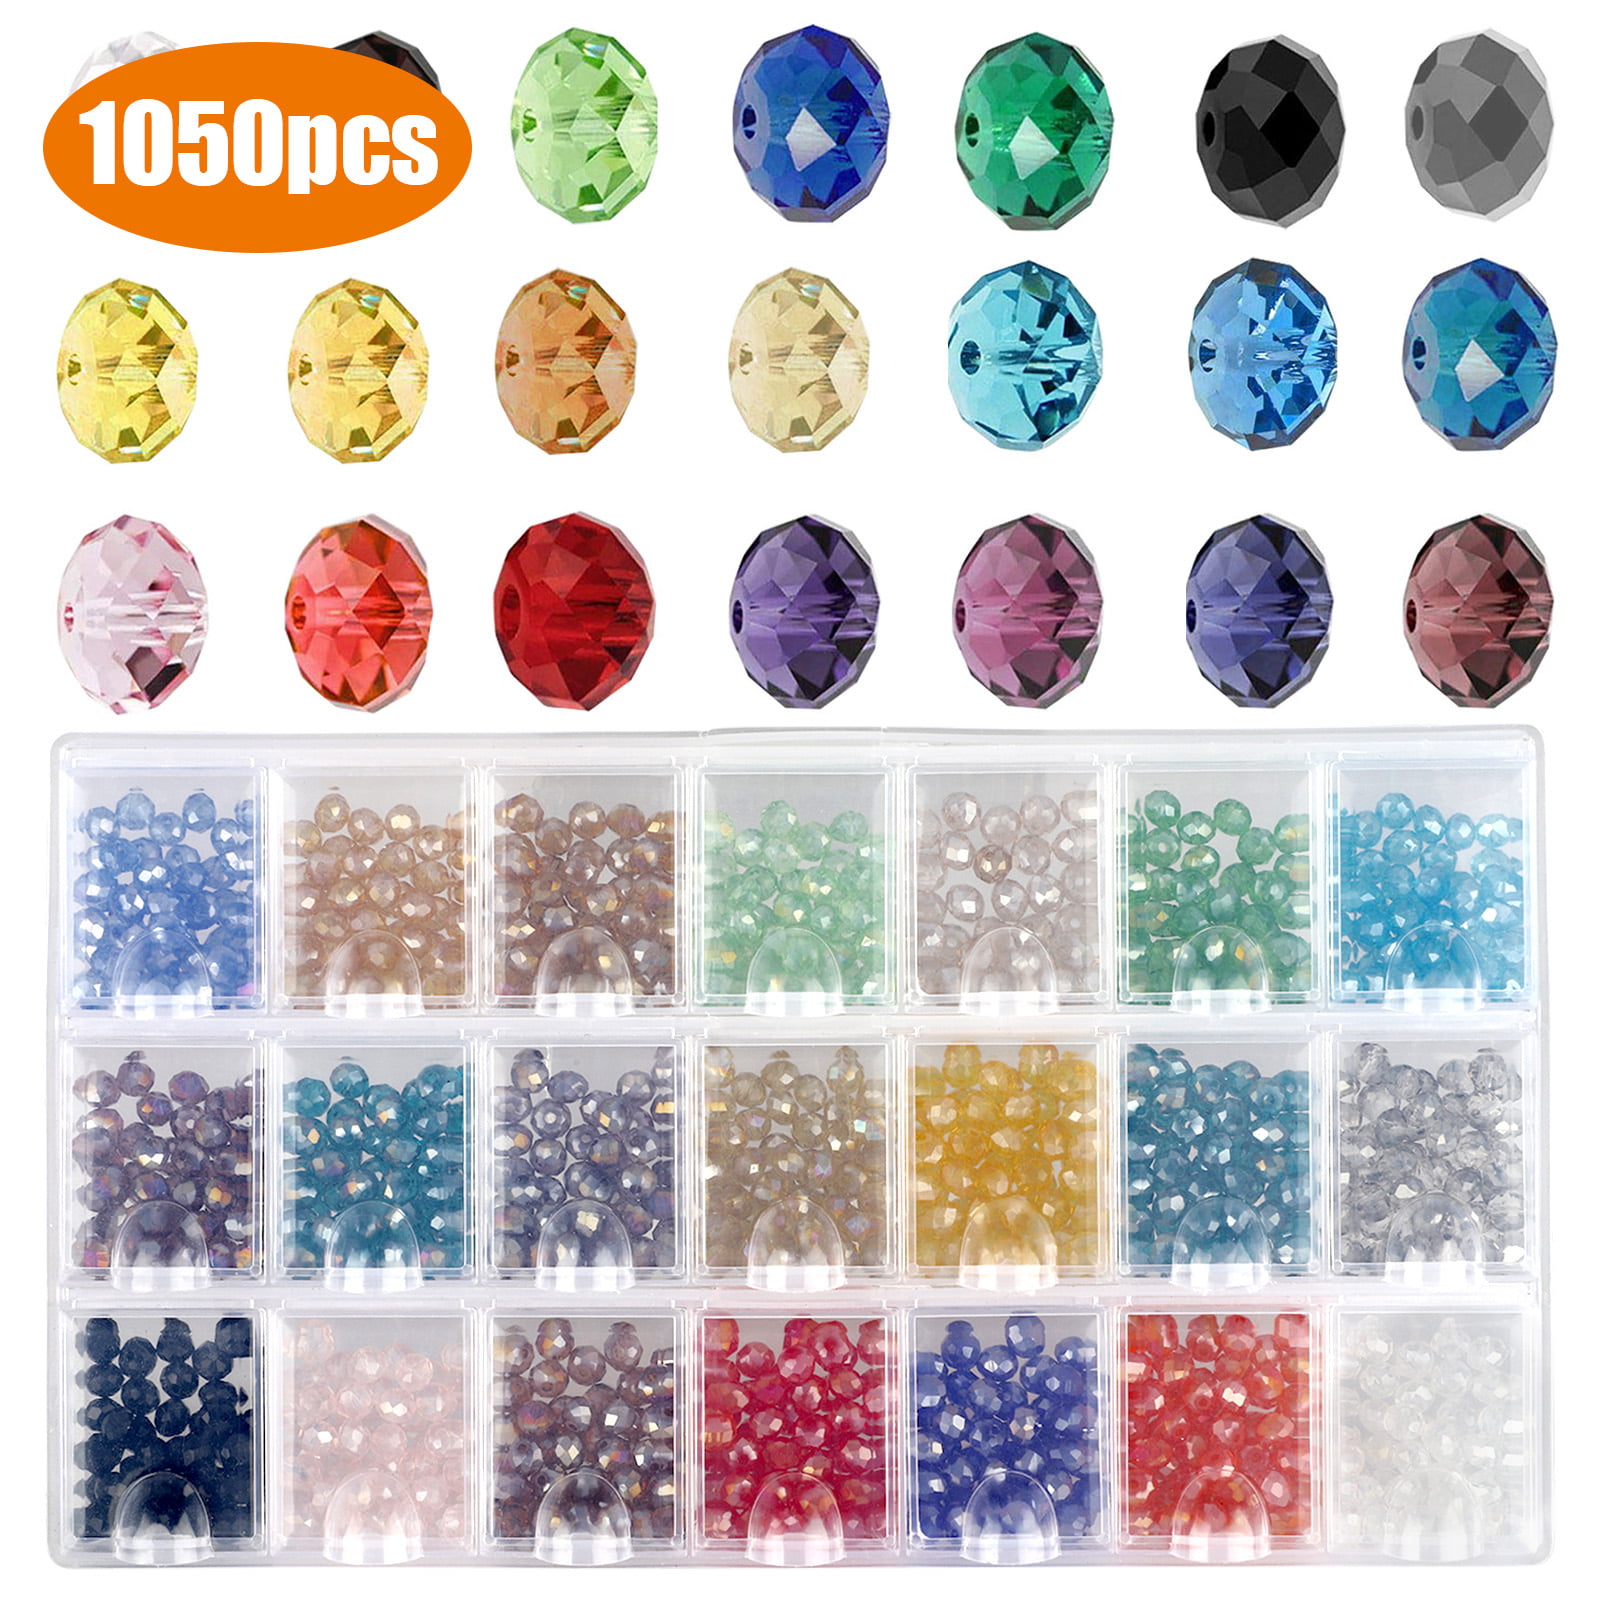 6mm/8mm/10mm Wholesale Charms Glass Crystal Faceted Cube Spacer Bead Findings#Q 